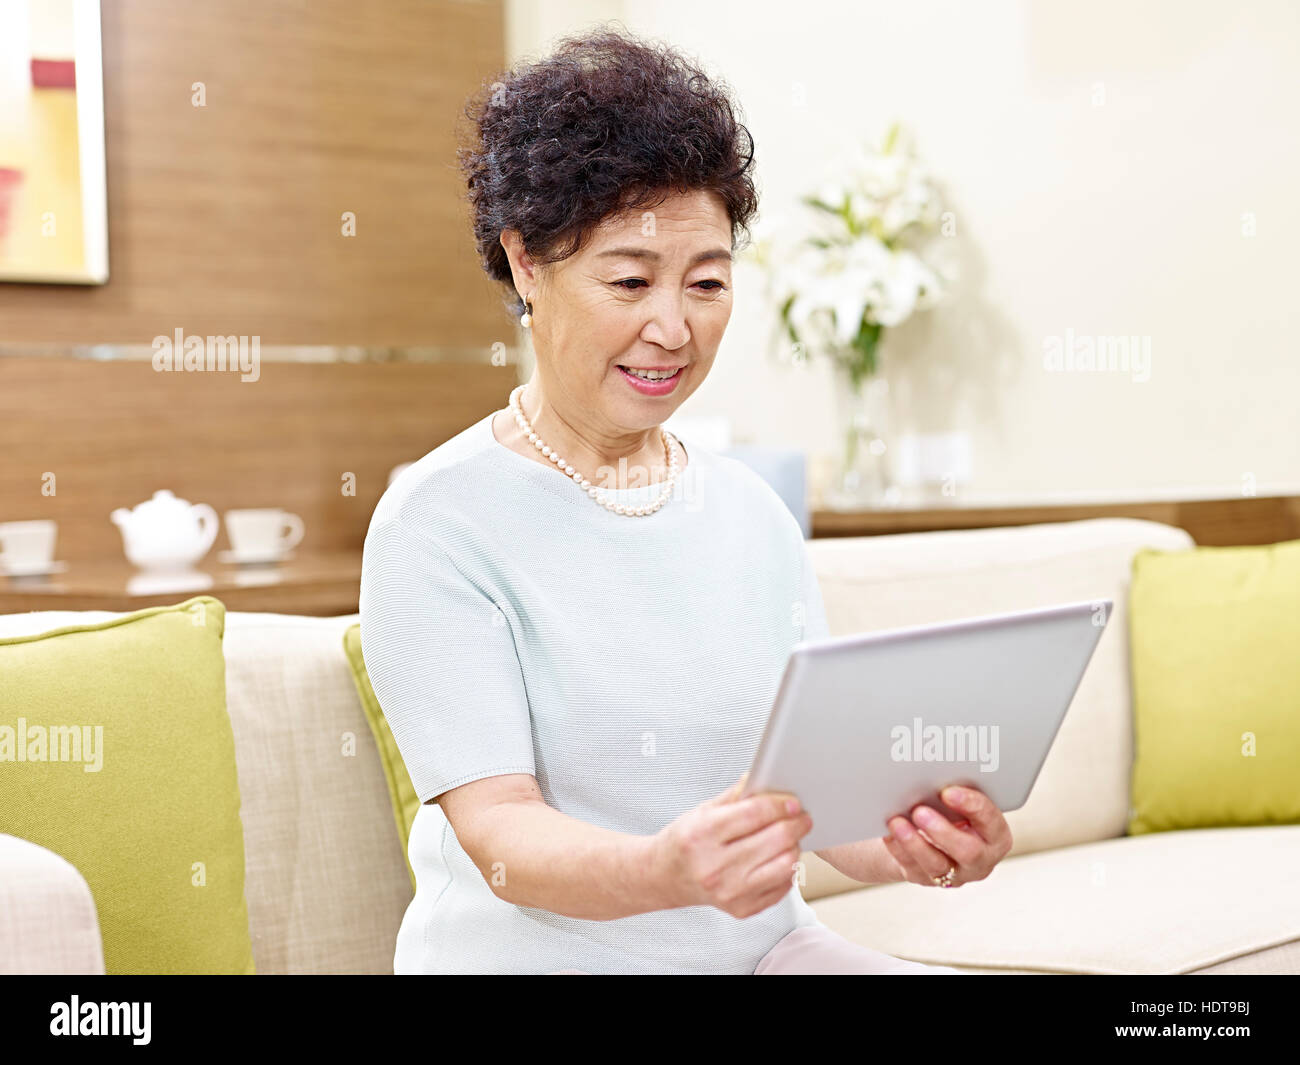 Senior asian woman sitting on couch looking at tablet computer Banque D'Images